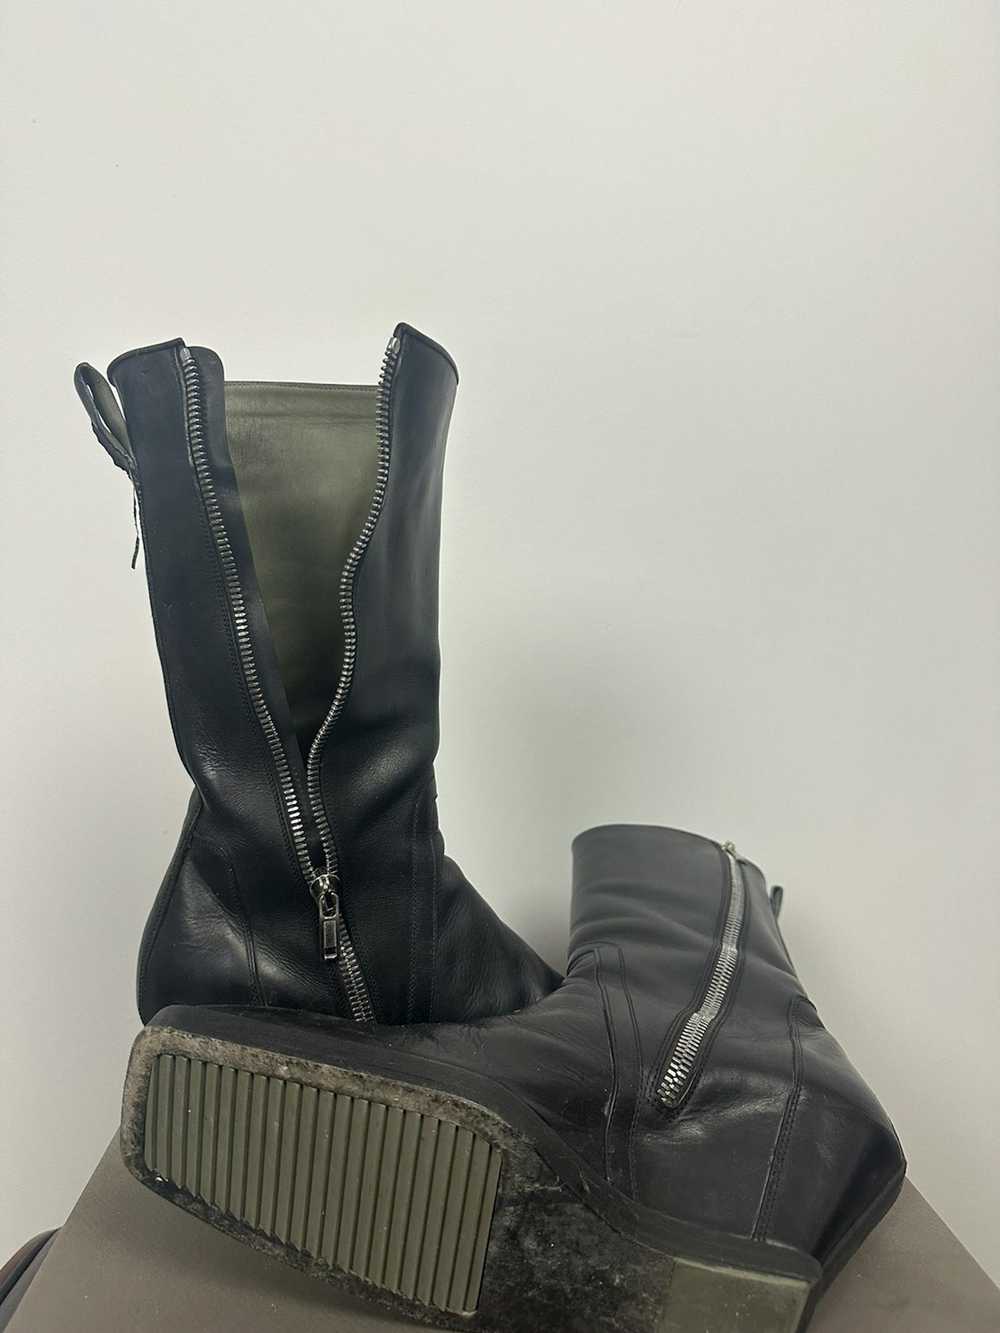 Rick Owens SS19 ‘BABEL’ Square Toe Wedge Boots - image 8